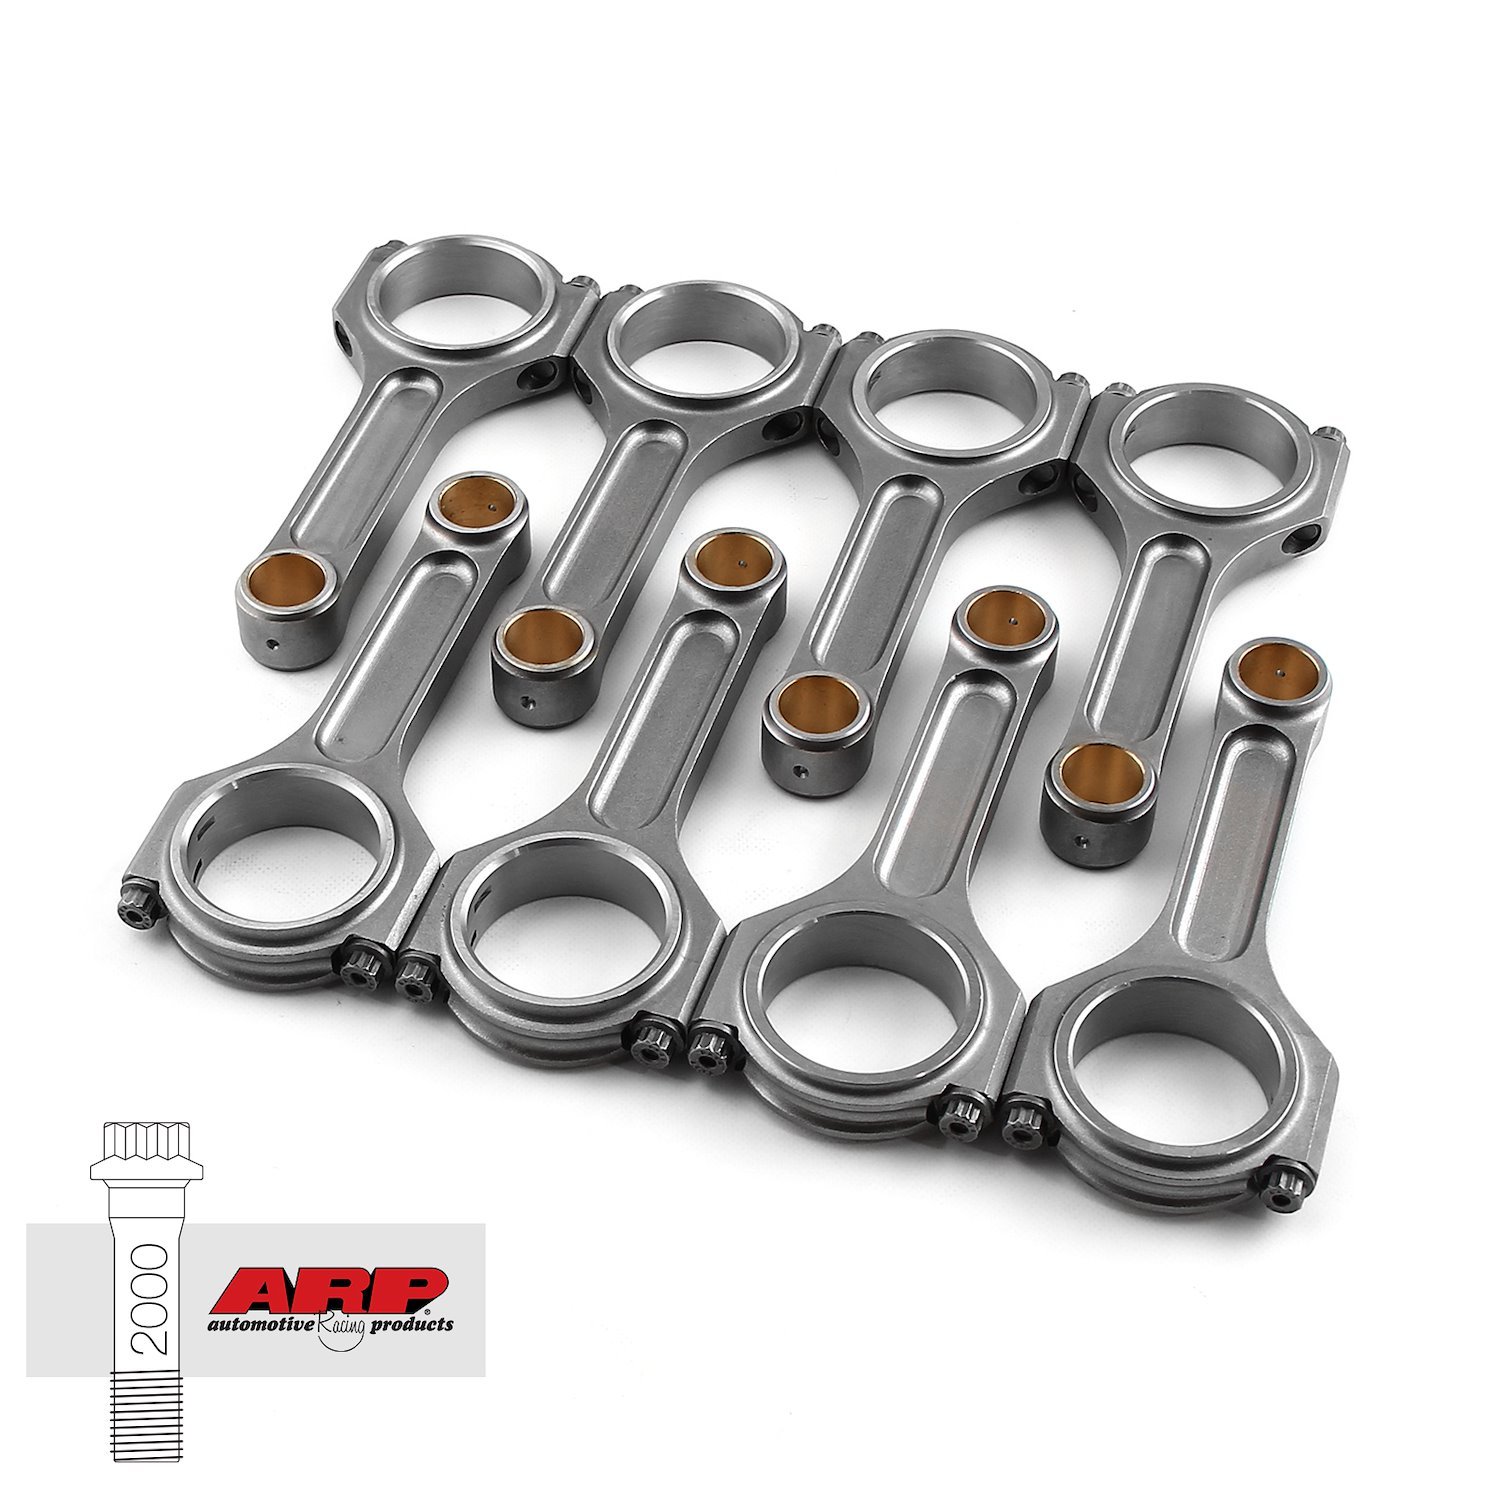 I BEAM PRO 5.090 2.123 .912 4340 CONNECTING RODS FORD 302 WINDSOR W/ ARP 2000